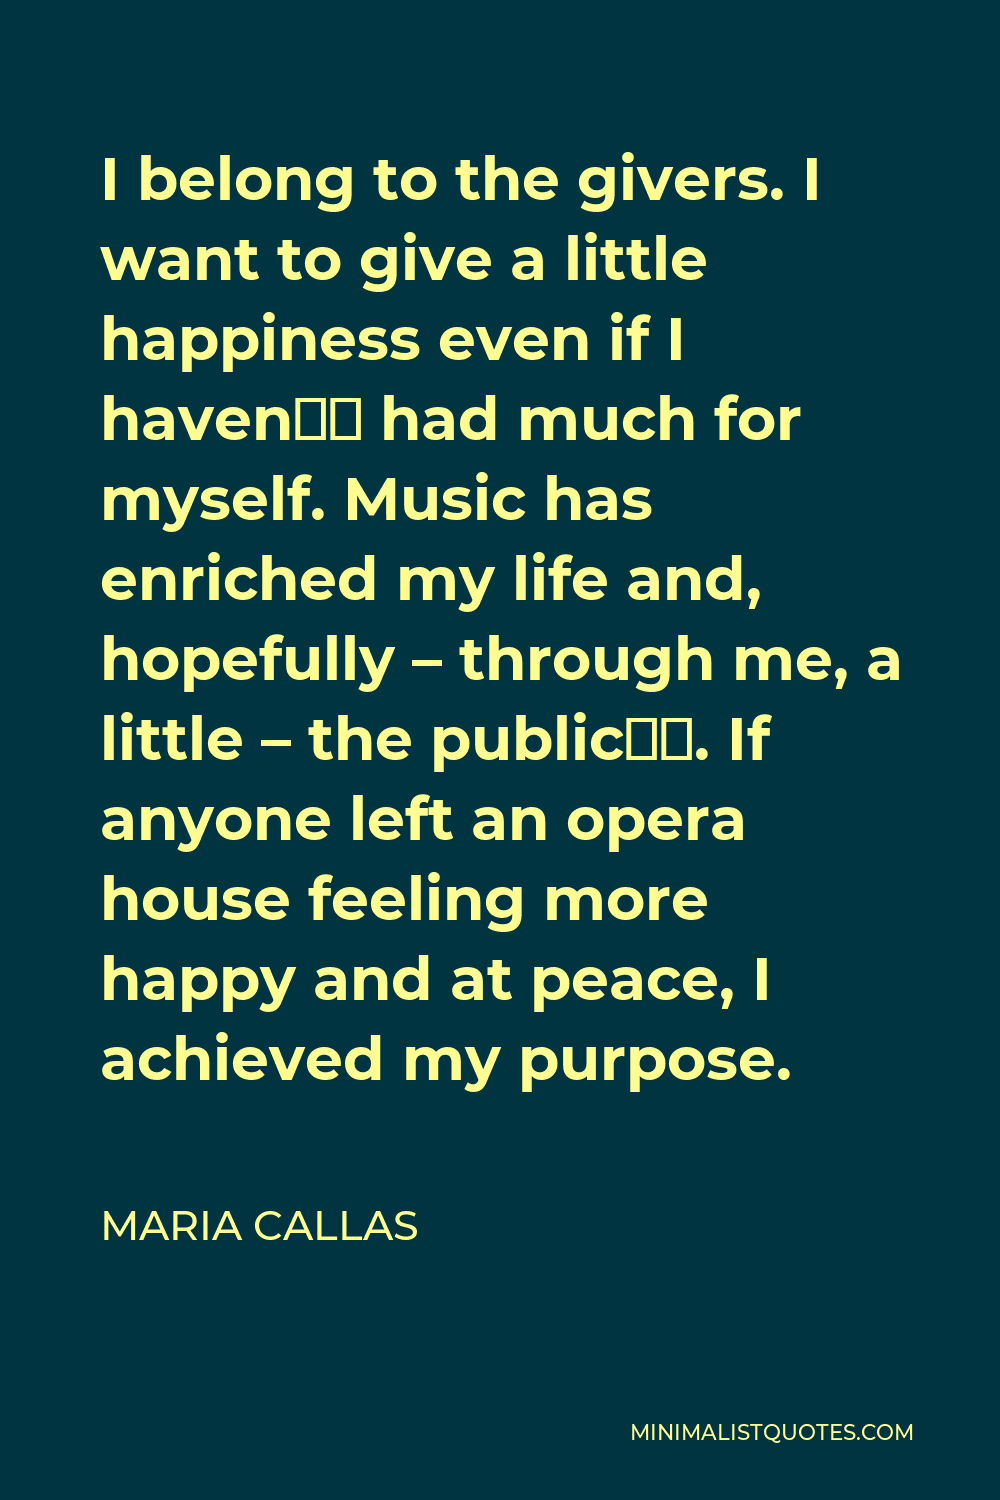 Maria Callas Quote - I belong to the givers. I want to give a little happiness even if I haven’t had much for myself. Music has enriched my life and, hopefully – through me, a little – the public’s. If anyone left an opera house feeling more happy and at peace, I achieved my purpose.